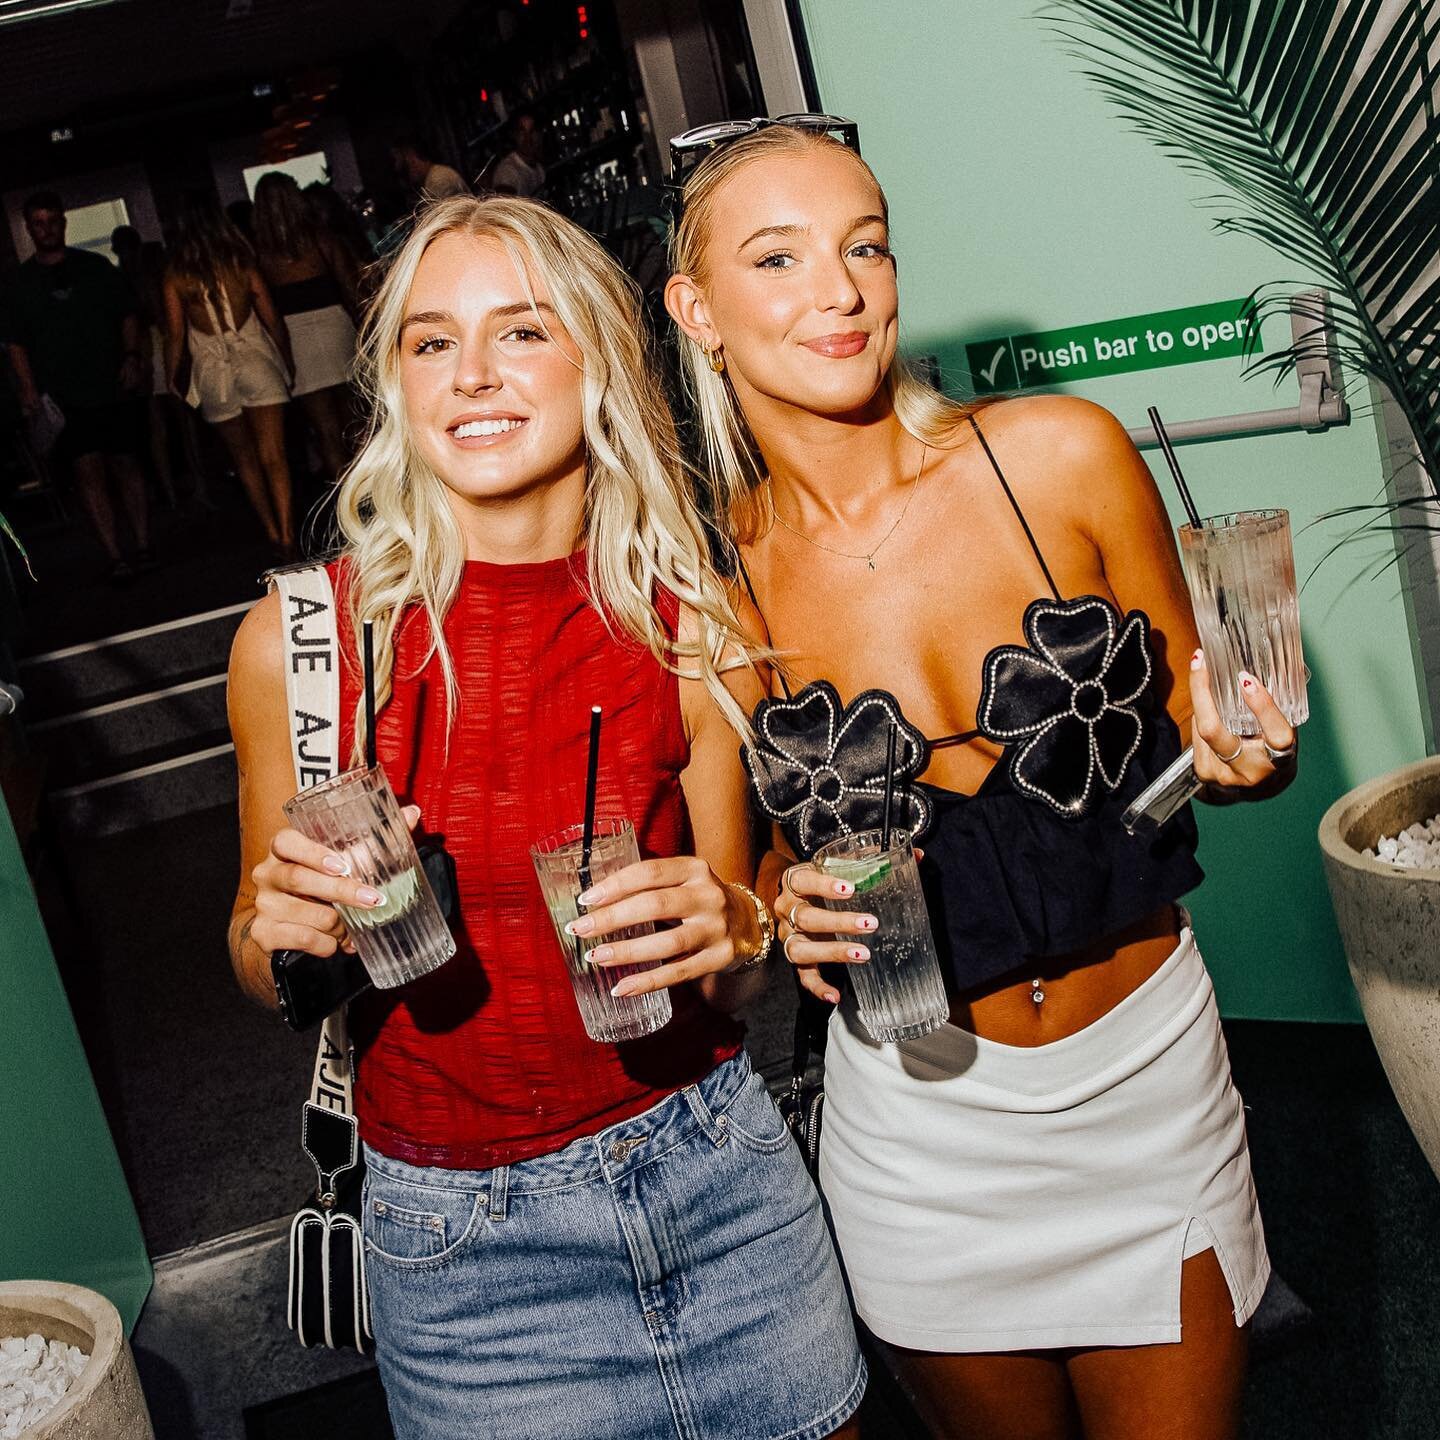 Escape to Palm Springs without leaving Newy.
Join us on the rooftop for a weekend getaway filled with summer vibes, cocktails, and fresh food. 
Whether you&rsquo;re partying the night away or just catching up with mates, Charlies Rooftop is your tick